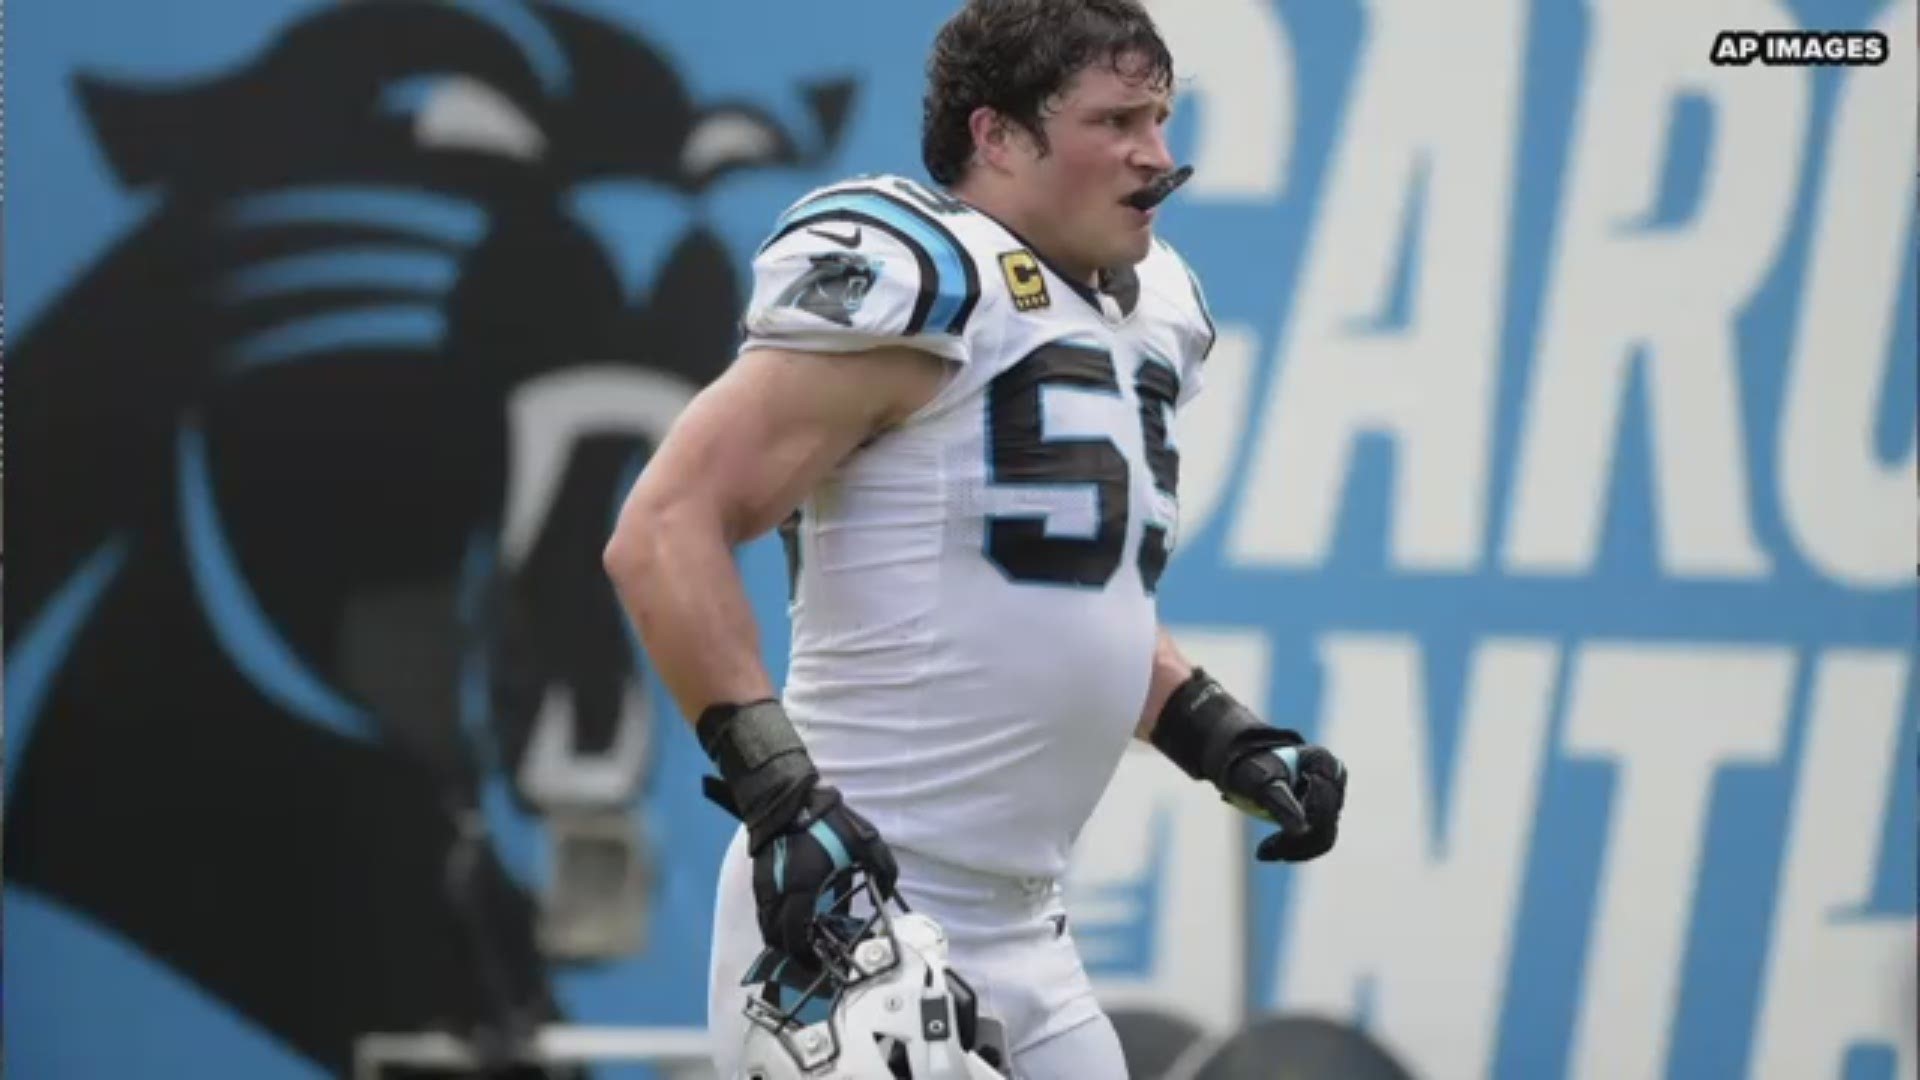 Carolina Panthers Linebacker, Luke Kuechly is retiring after eight seasons in the NFL. The Panthers said he’s one of the greatest players to ever wear the jersey.